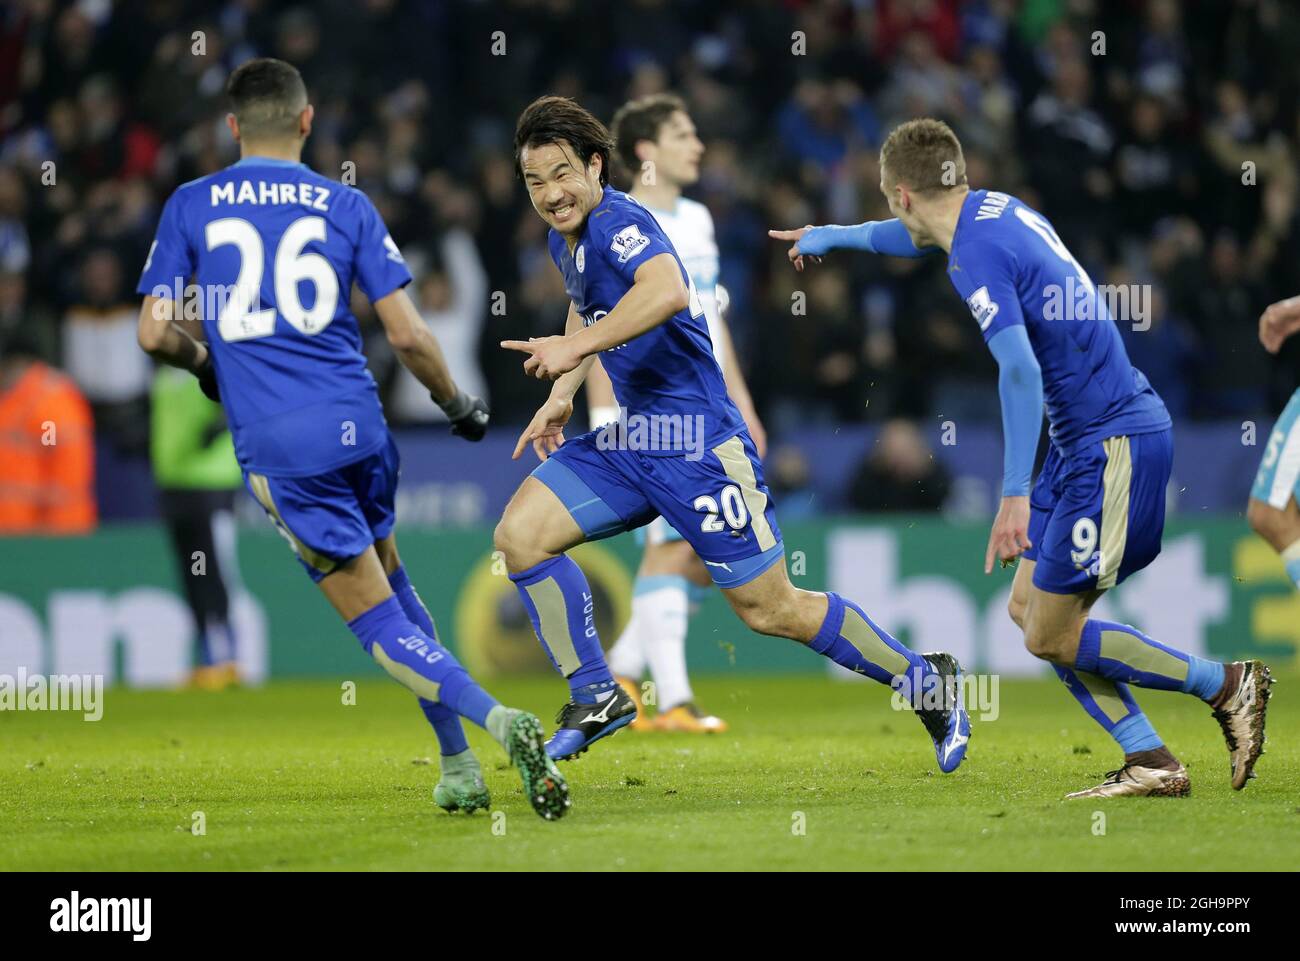 Shinji Okazaki Of Leicester City Celebrates His Goal During The Barclays Premier League Match At The King Power Stadium Photo Credit Should Read Malcolm Couzens Sportimage Via Pa Images Stock Photo Alamy